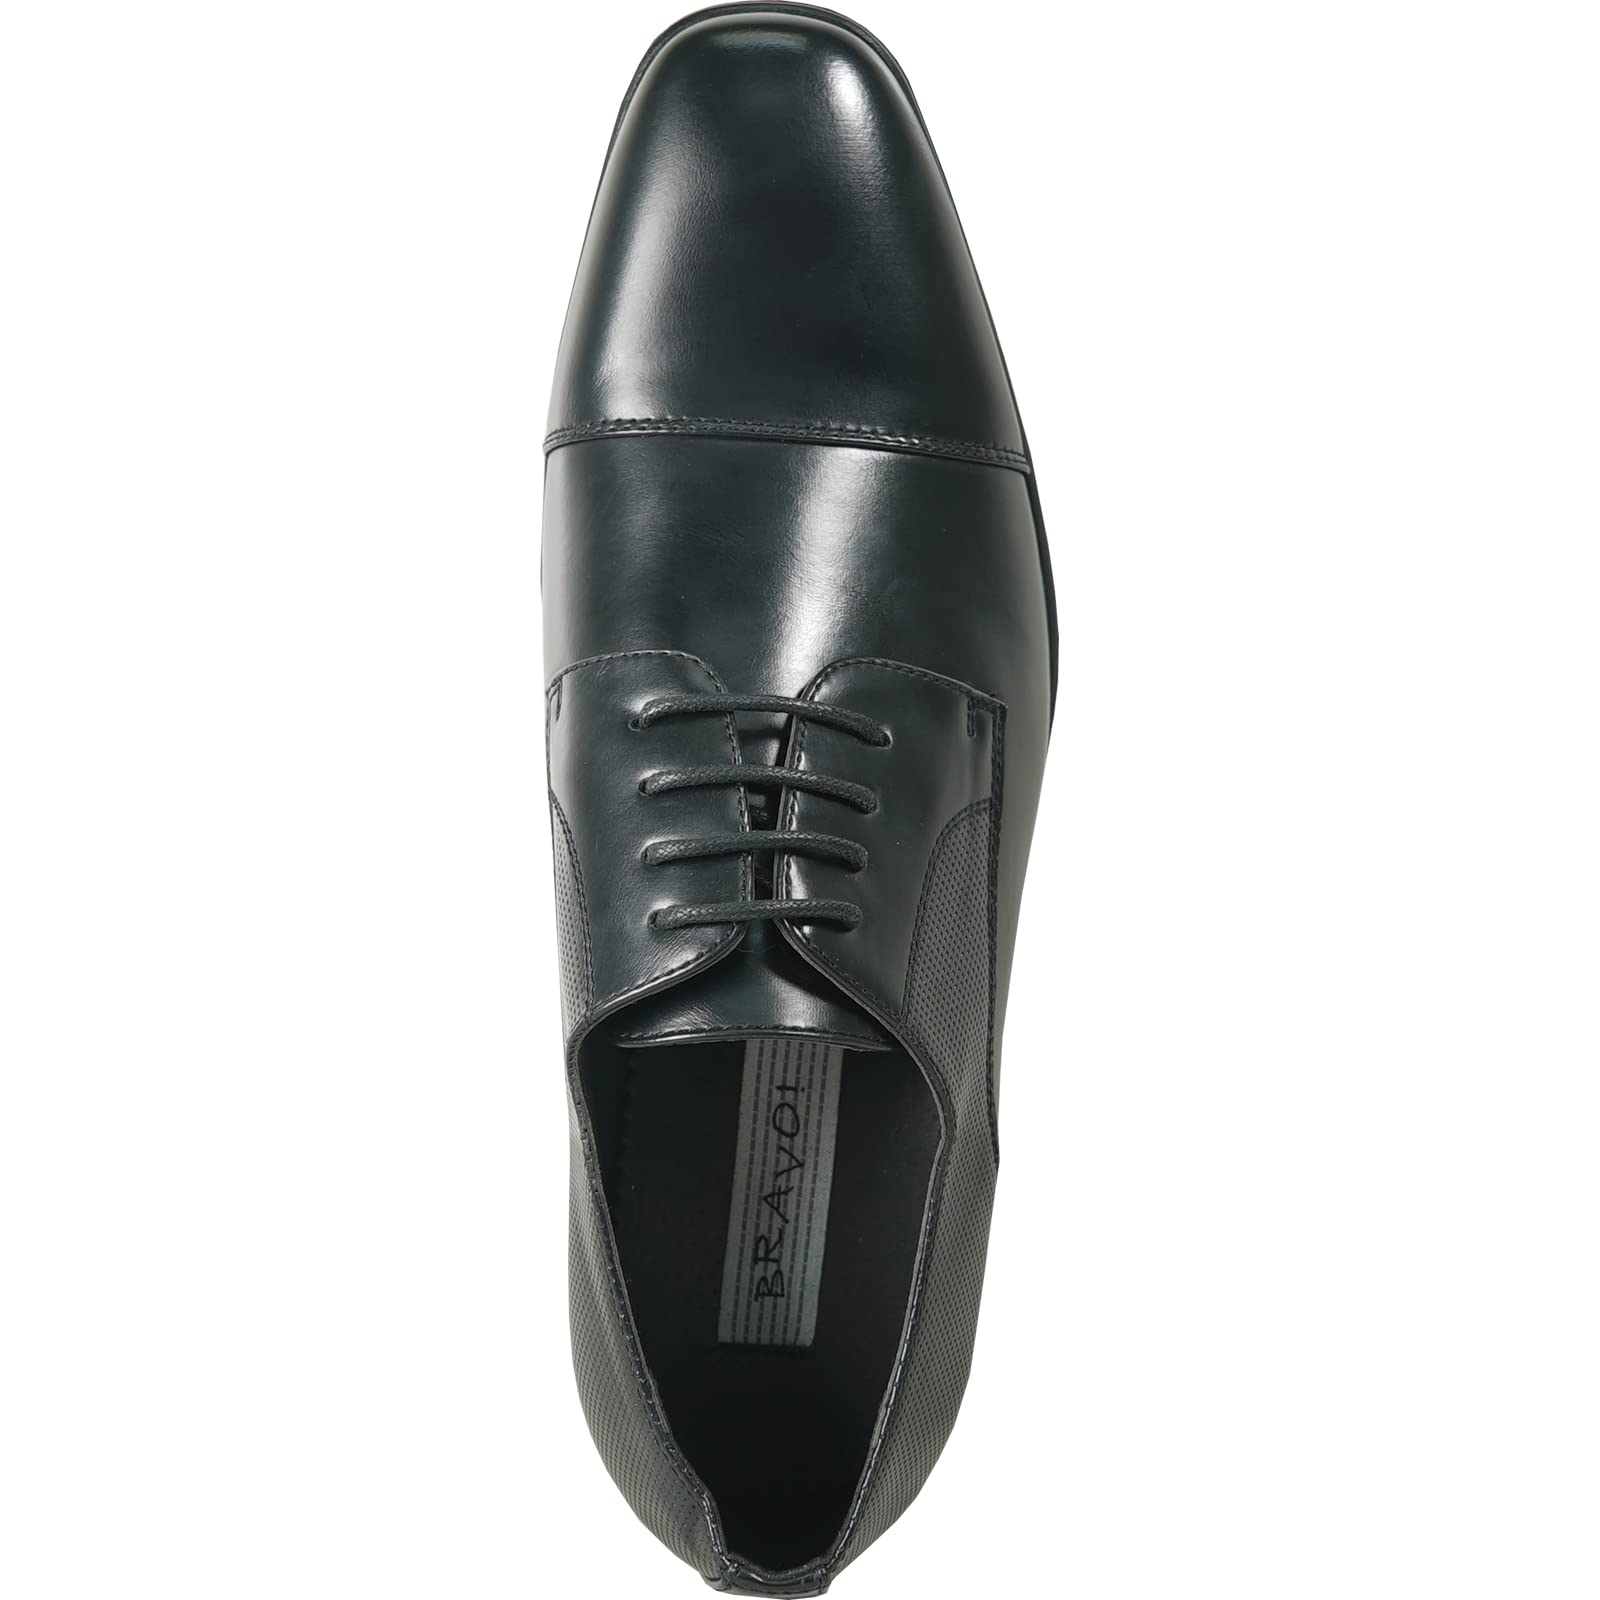 Bravo! Men Dress Shoe King-6 King-7 Classic Lace Up Oxford Plain or Cap Toe with Leather Sock Medium and Wide Width Black and Cognac